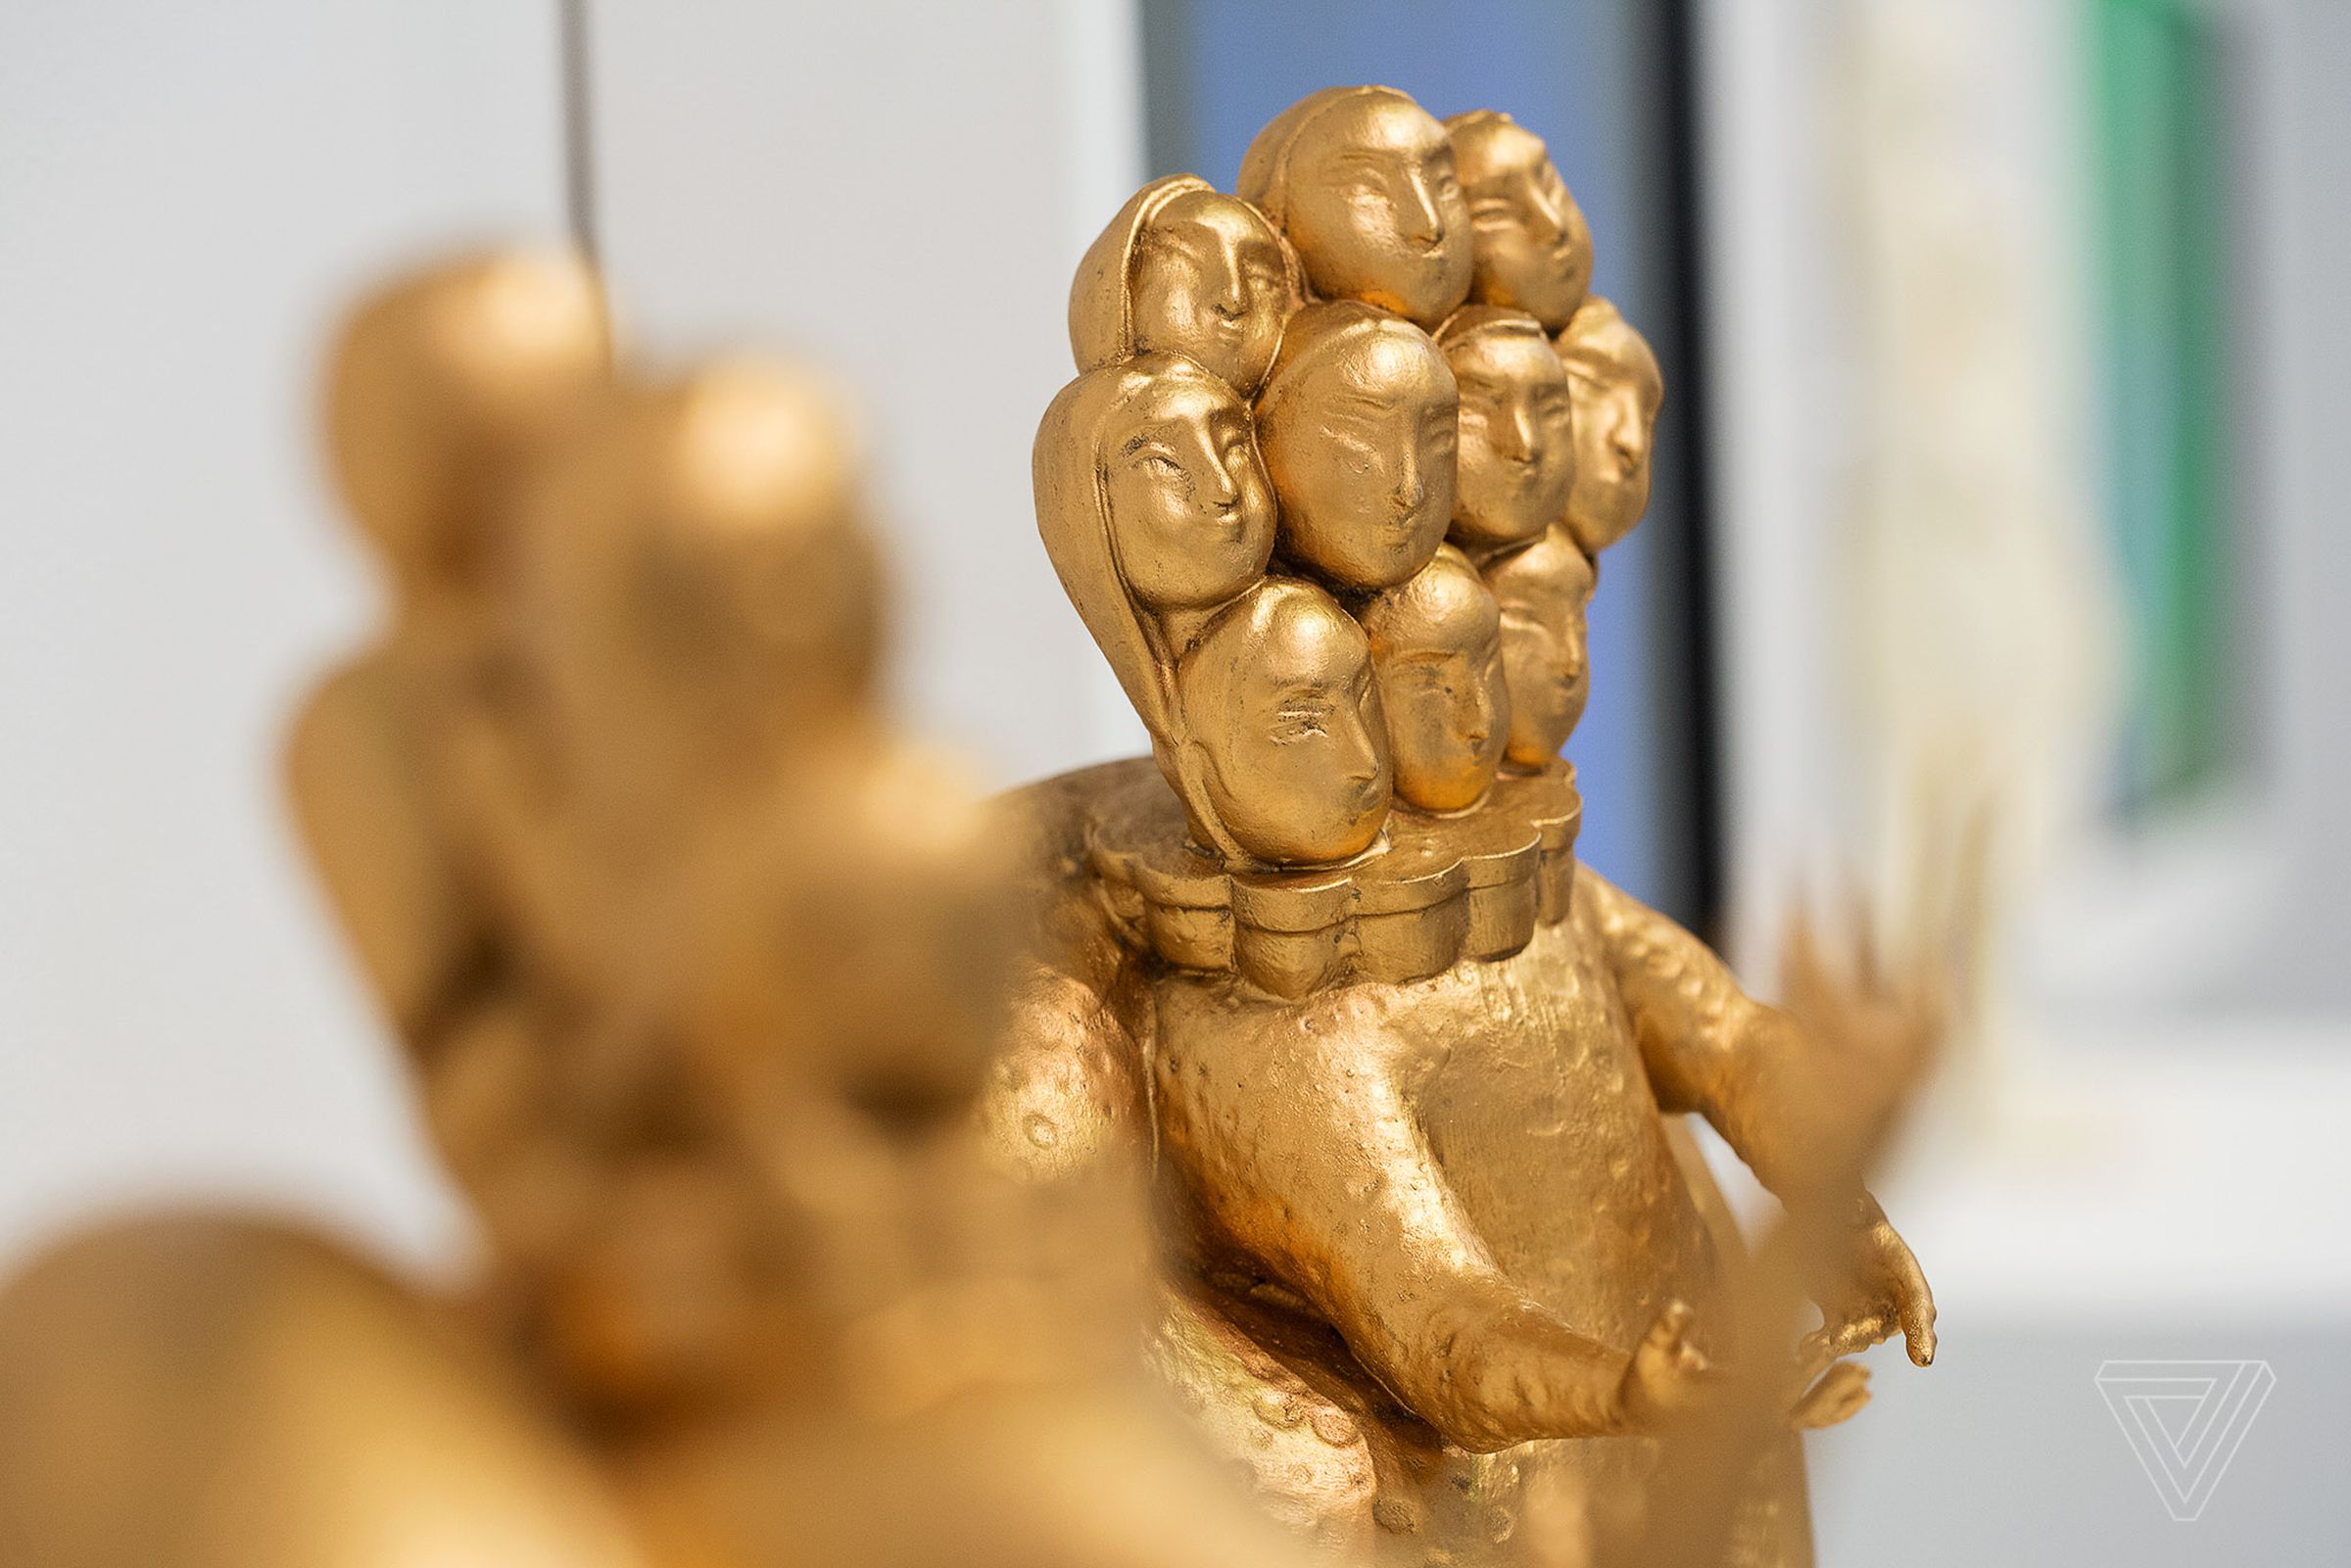 Detail of the Ya’Jooj  and Ma’Jooj sculptures. The figure is part of the project, She Who Sees The Unknown, which "recontextualizes goddesses and female Jinn of Persian and Arabic origin" and "explores ancient myths as they relate to digital colonialism, oppression, and catastrophe."